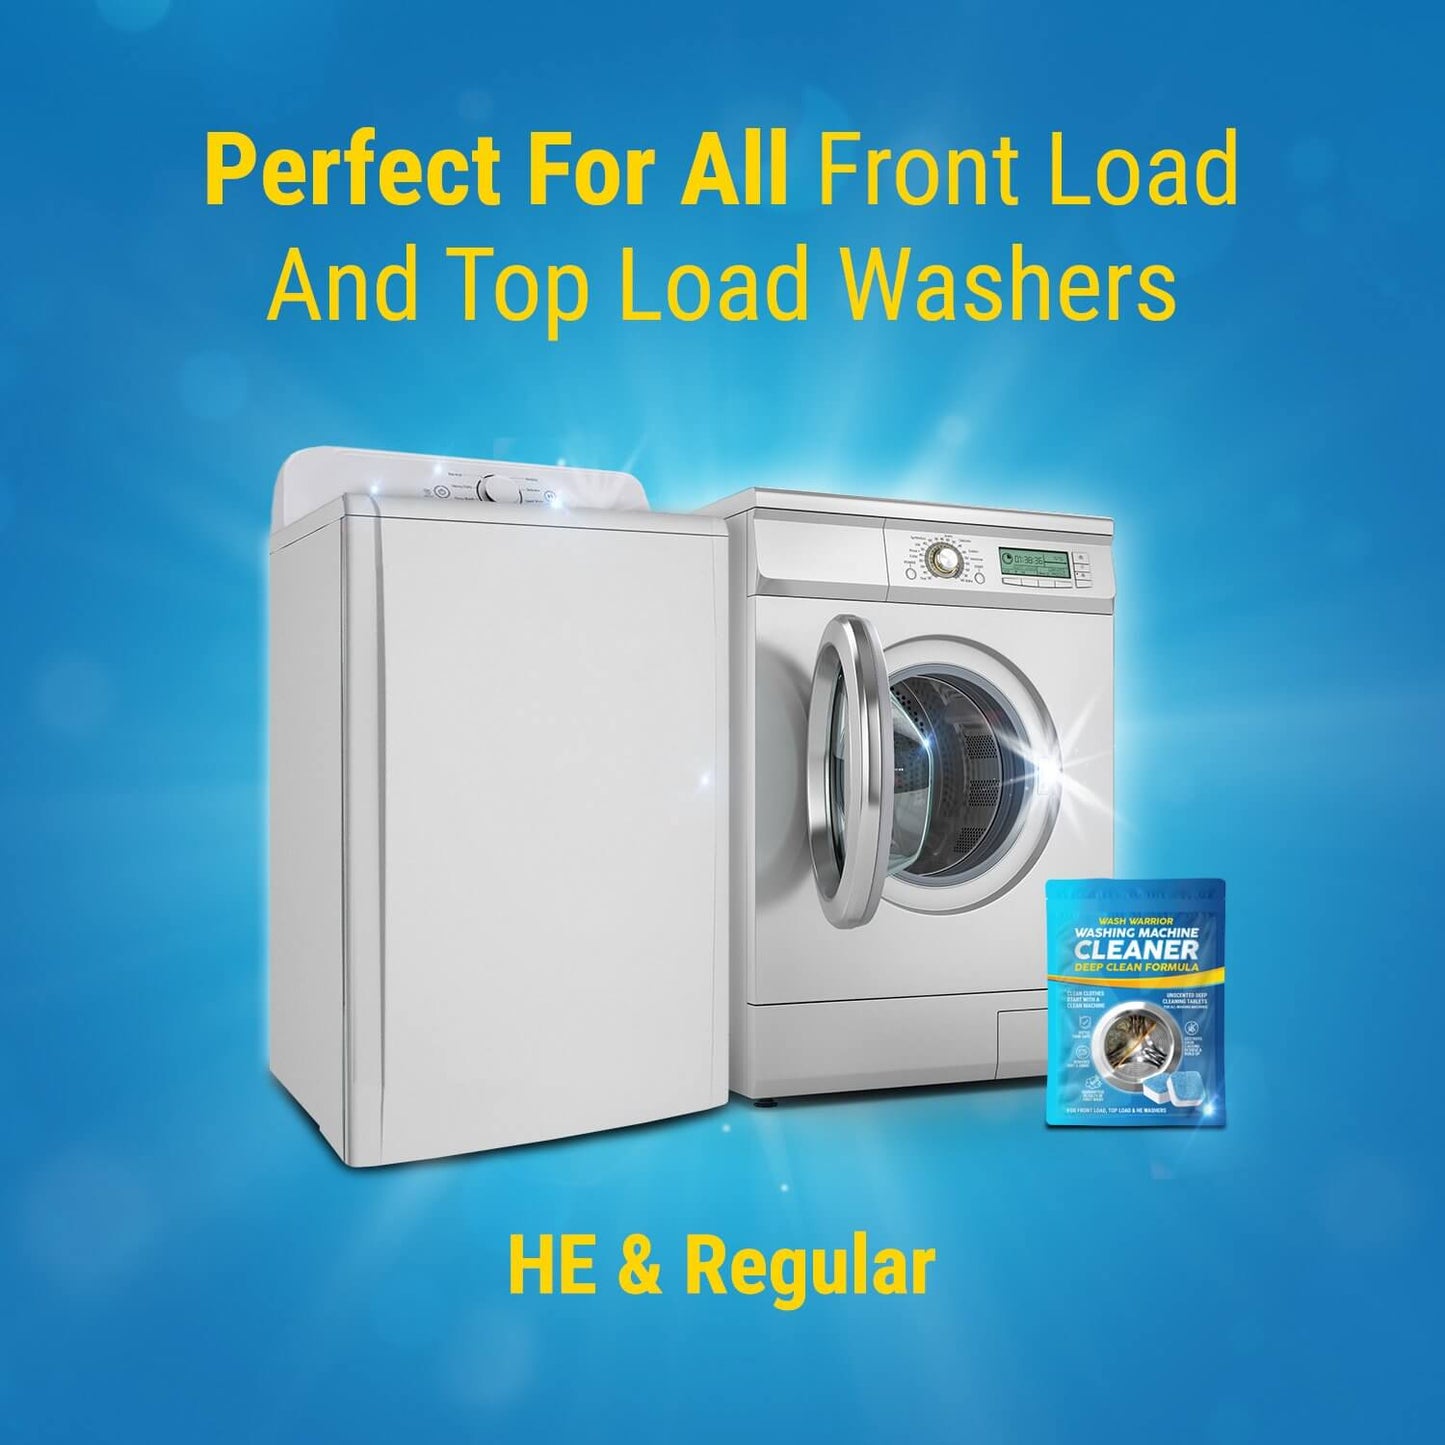 Extra Strength Washing Machine Deep Cleaning Tablets – Wash Warrior